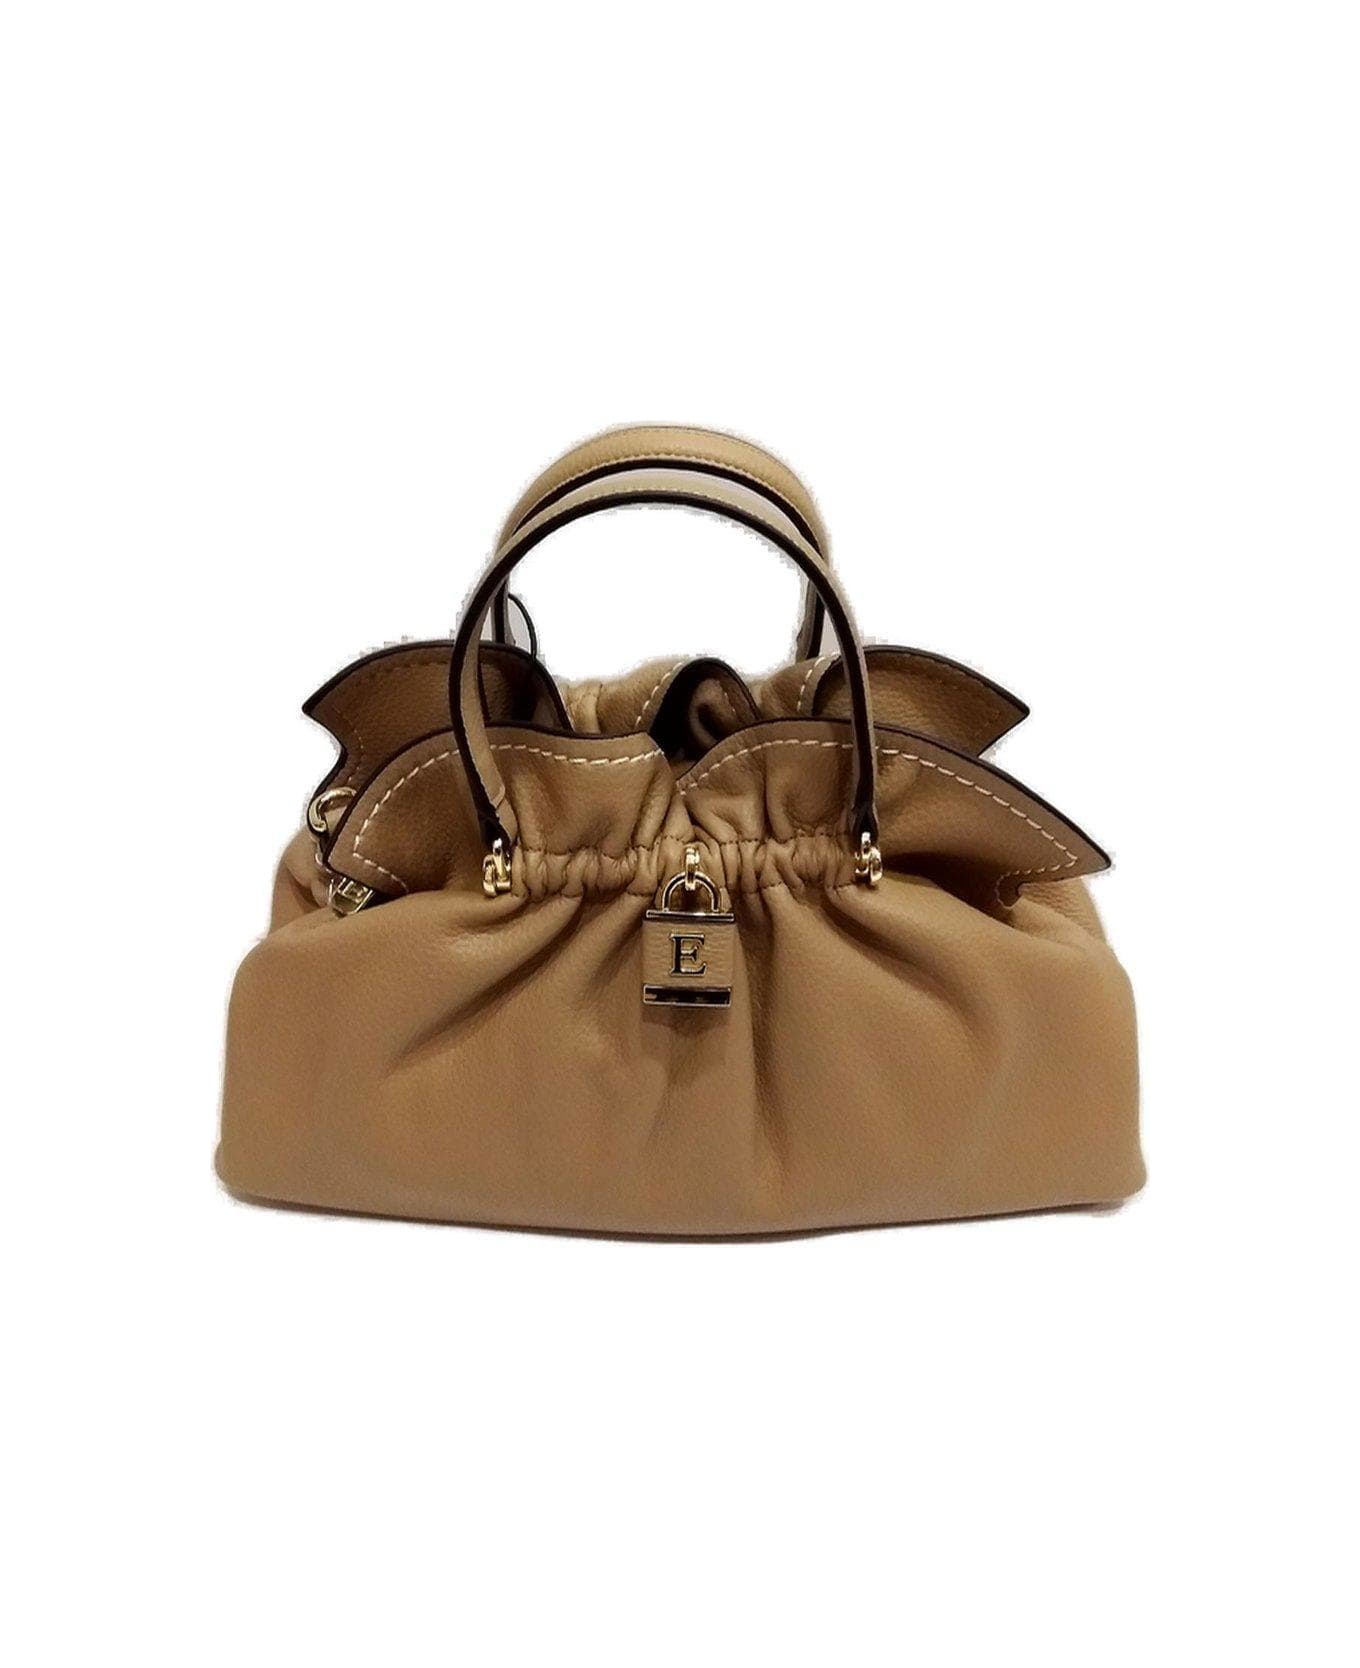 Ermanno Scervino Octavia Two Toned Small Tote Bag - Sand トートバッグ